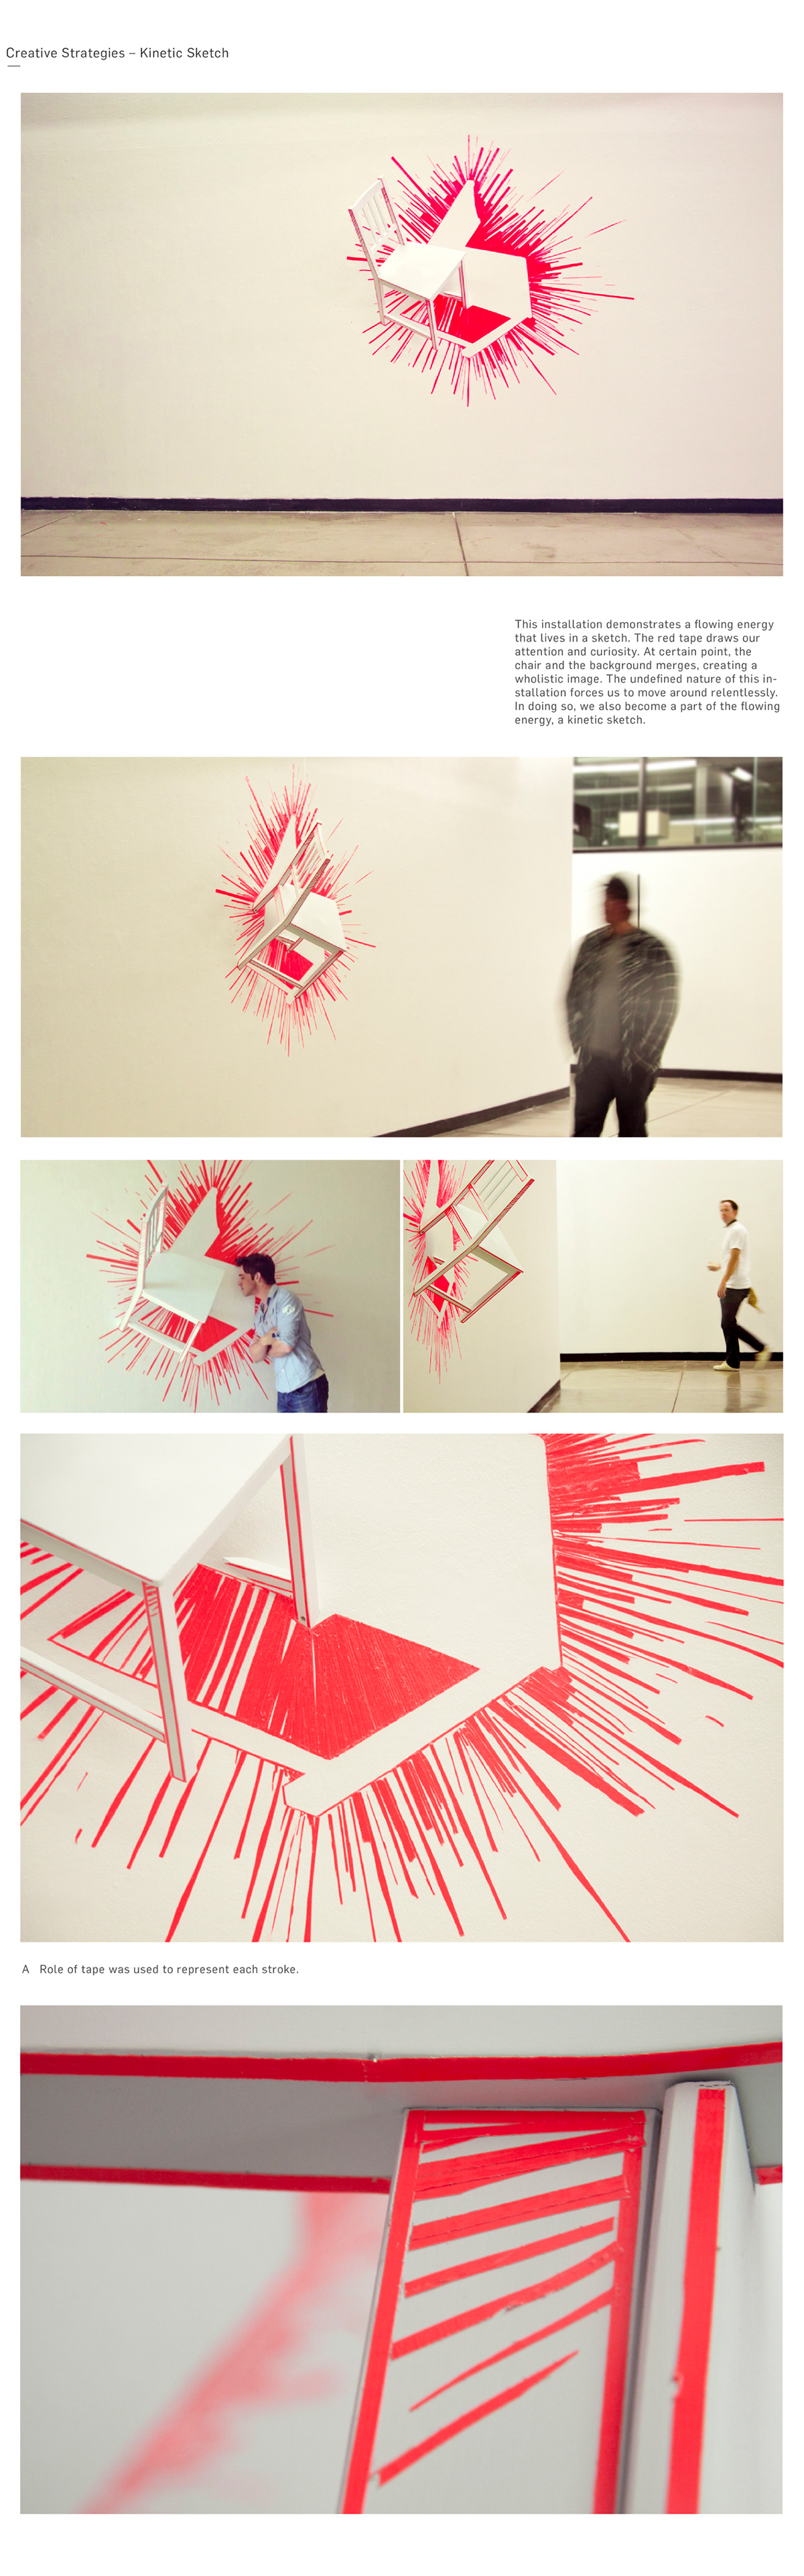 tape tapedrawing chair explosion kinetic sketch tangible